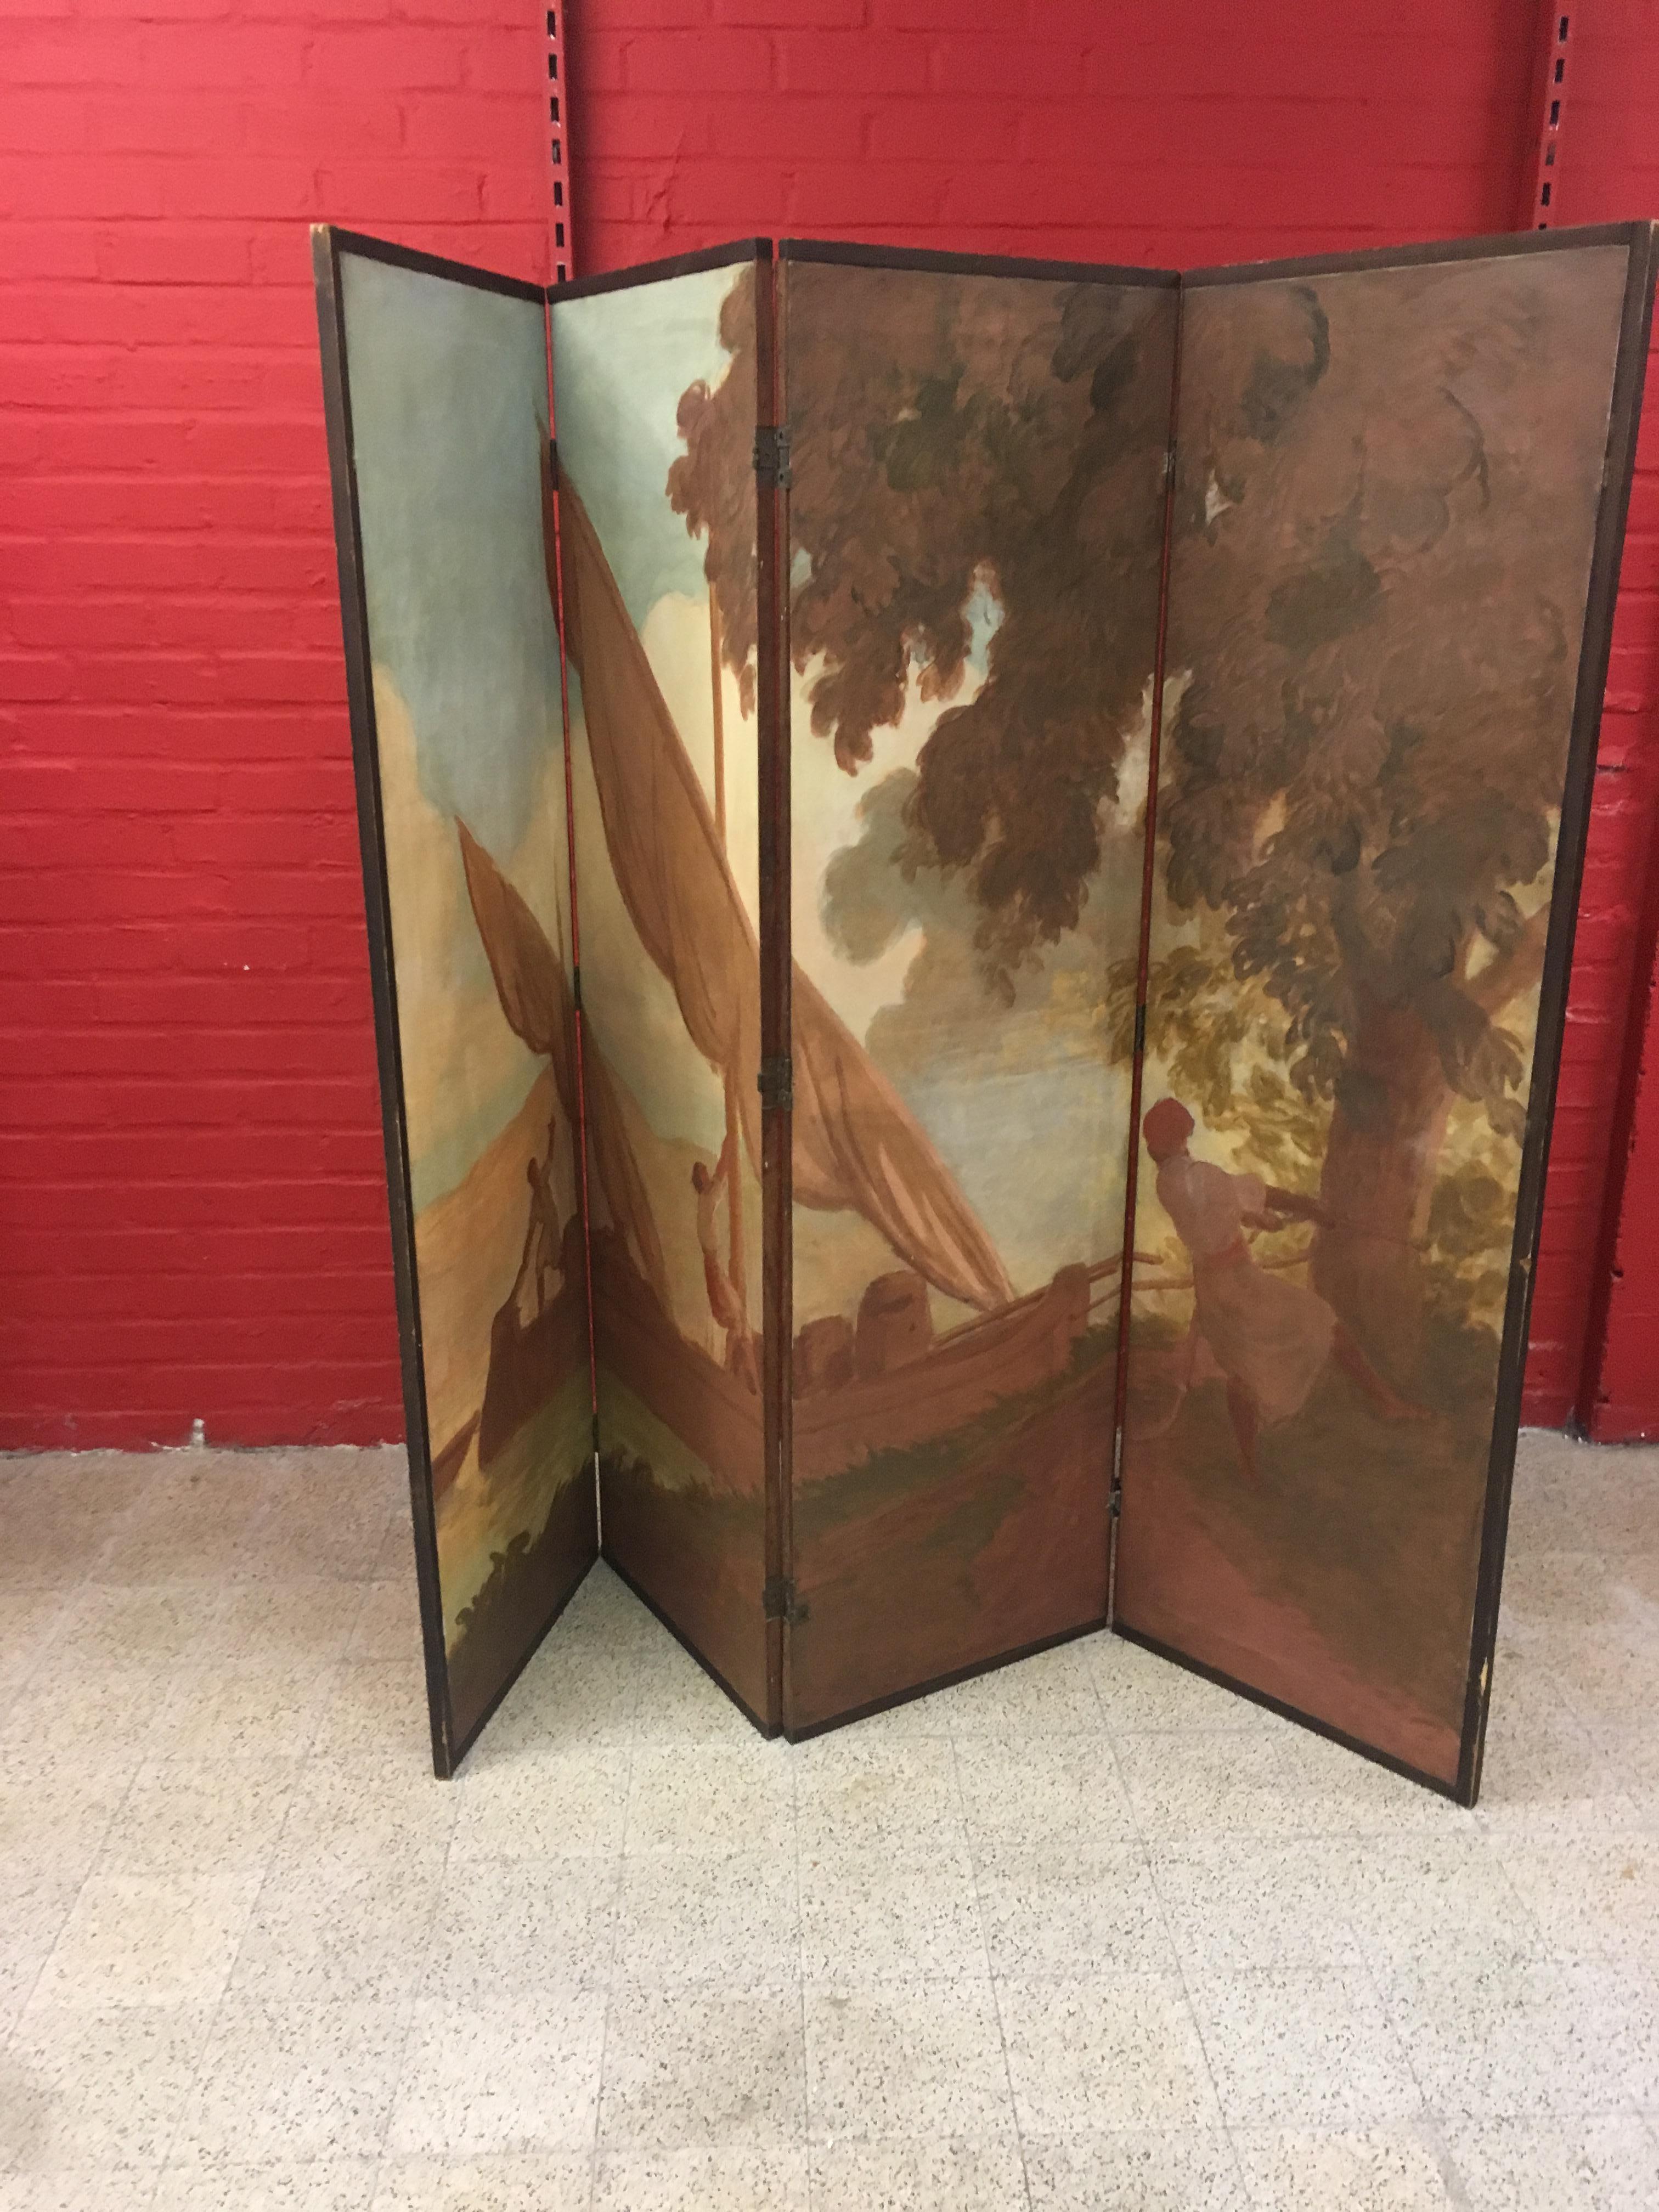 Egyptian Rare Folding Screen Period 1900, Composed of Two Elements, circa 1900 For Sale